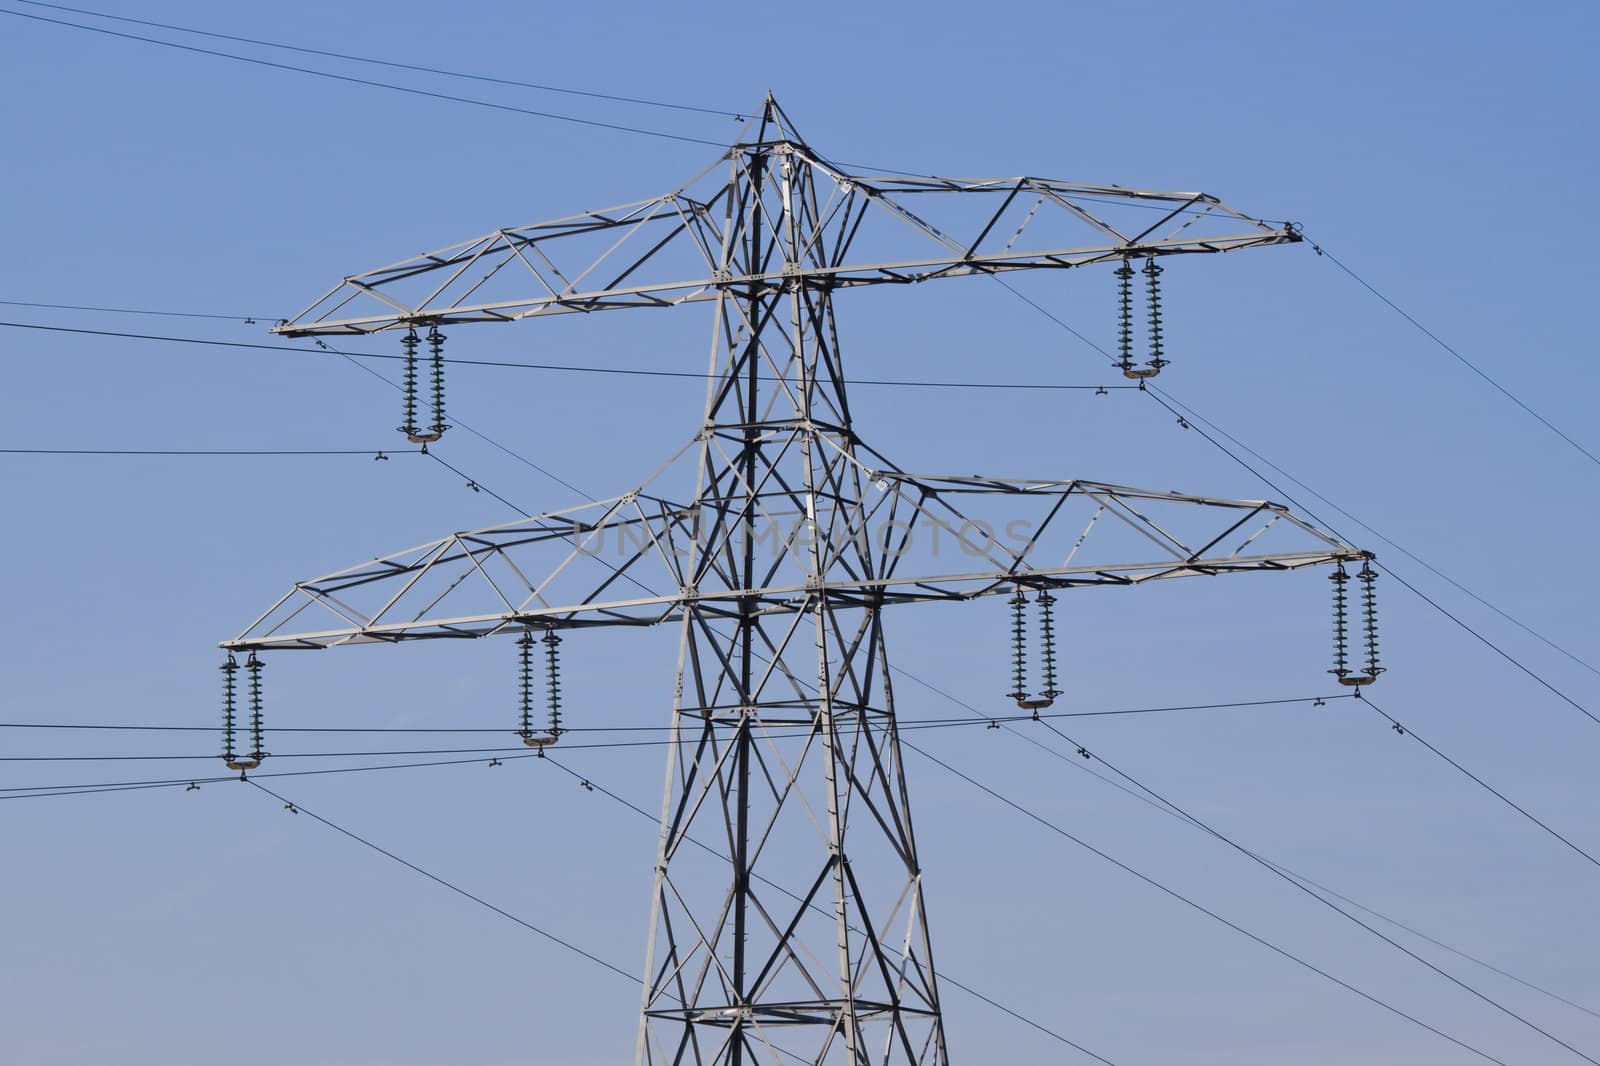 Pylon with electricity wires for energy supply and blue sky background